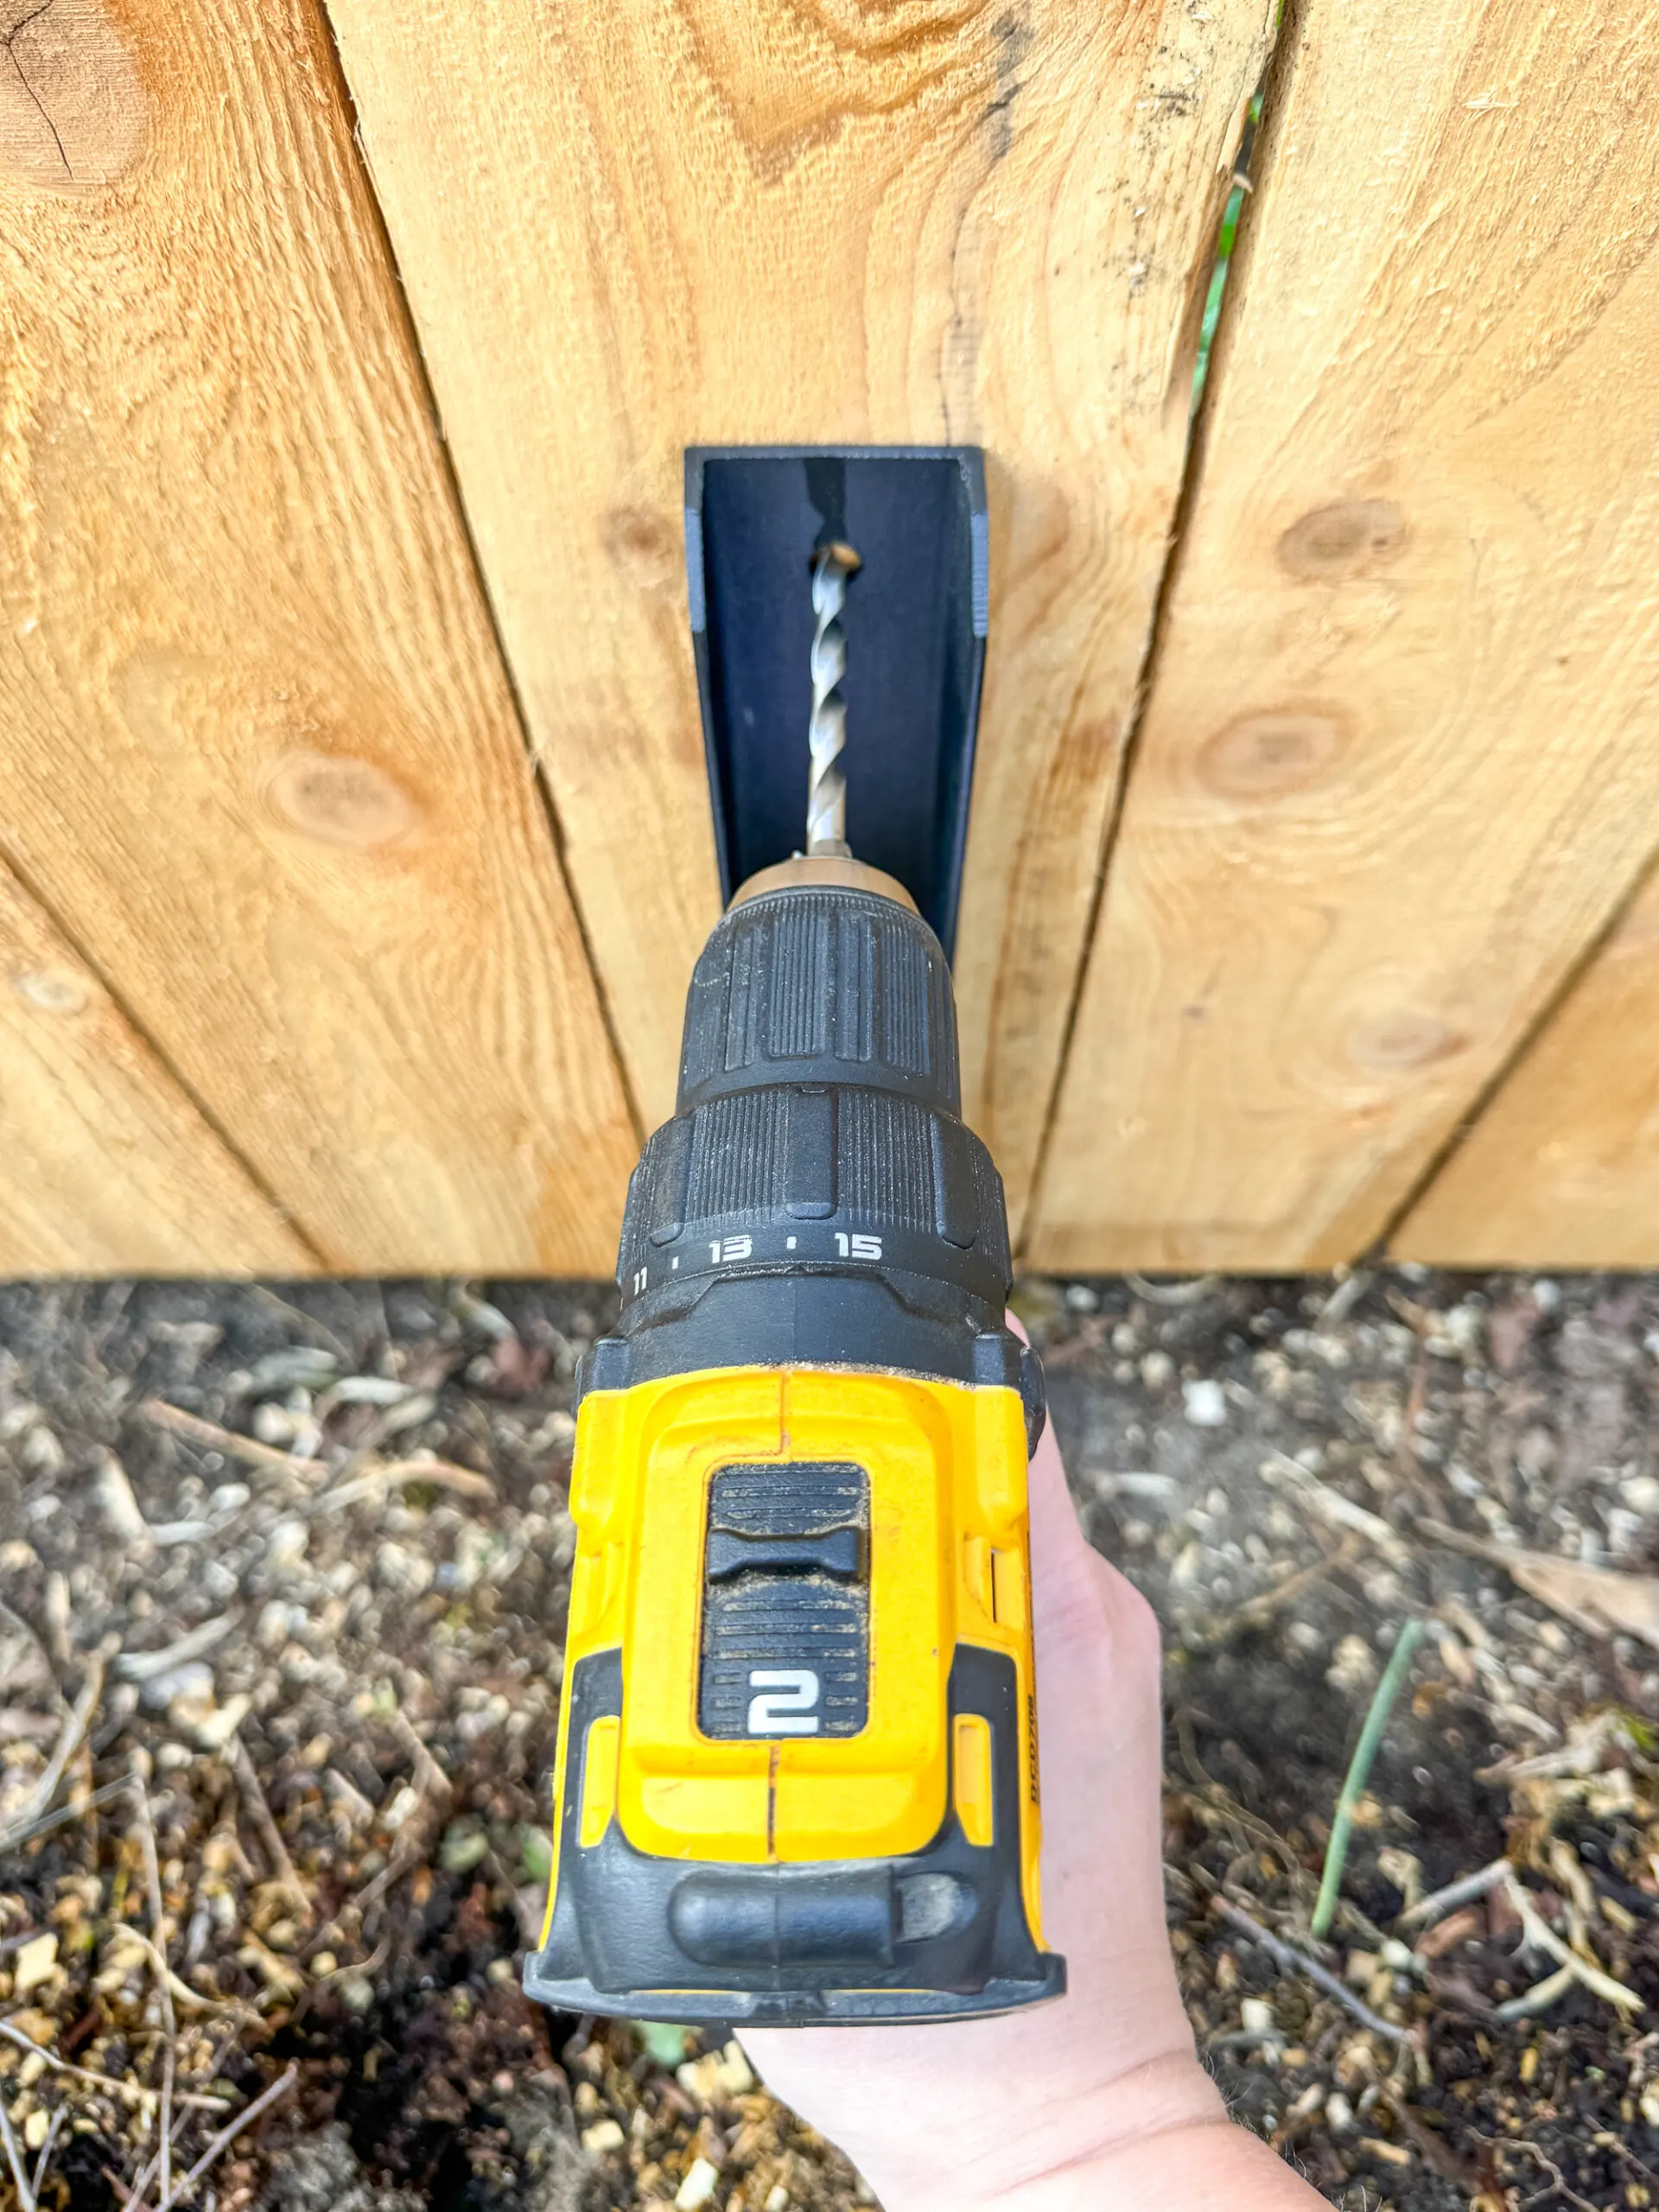 drilling pilot holes in fence post through fence repair bracket